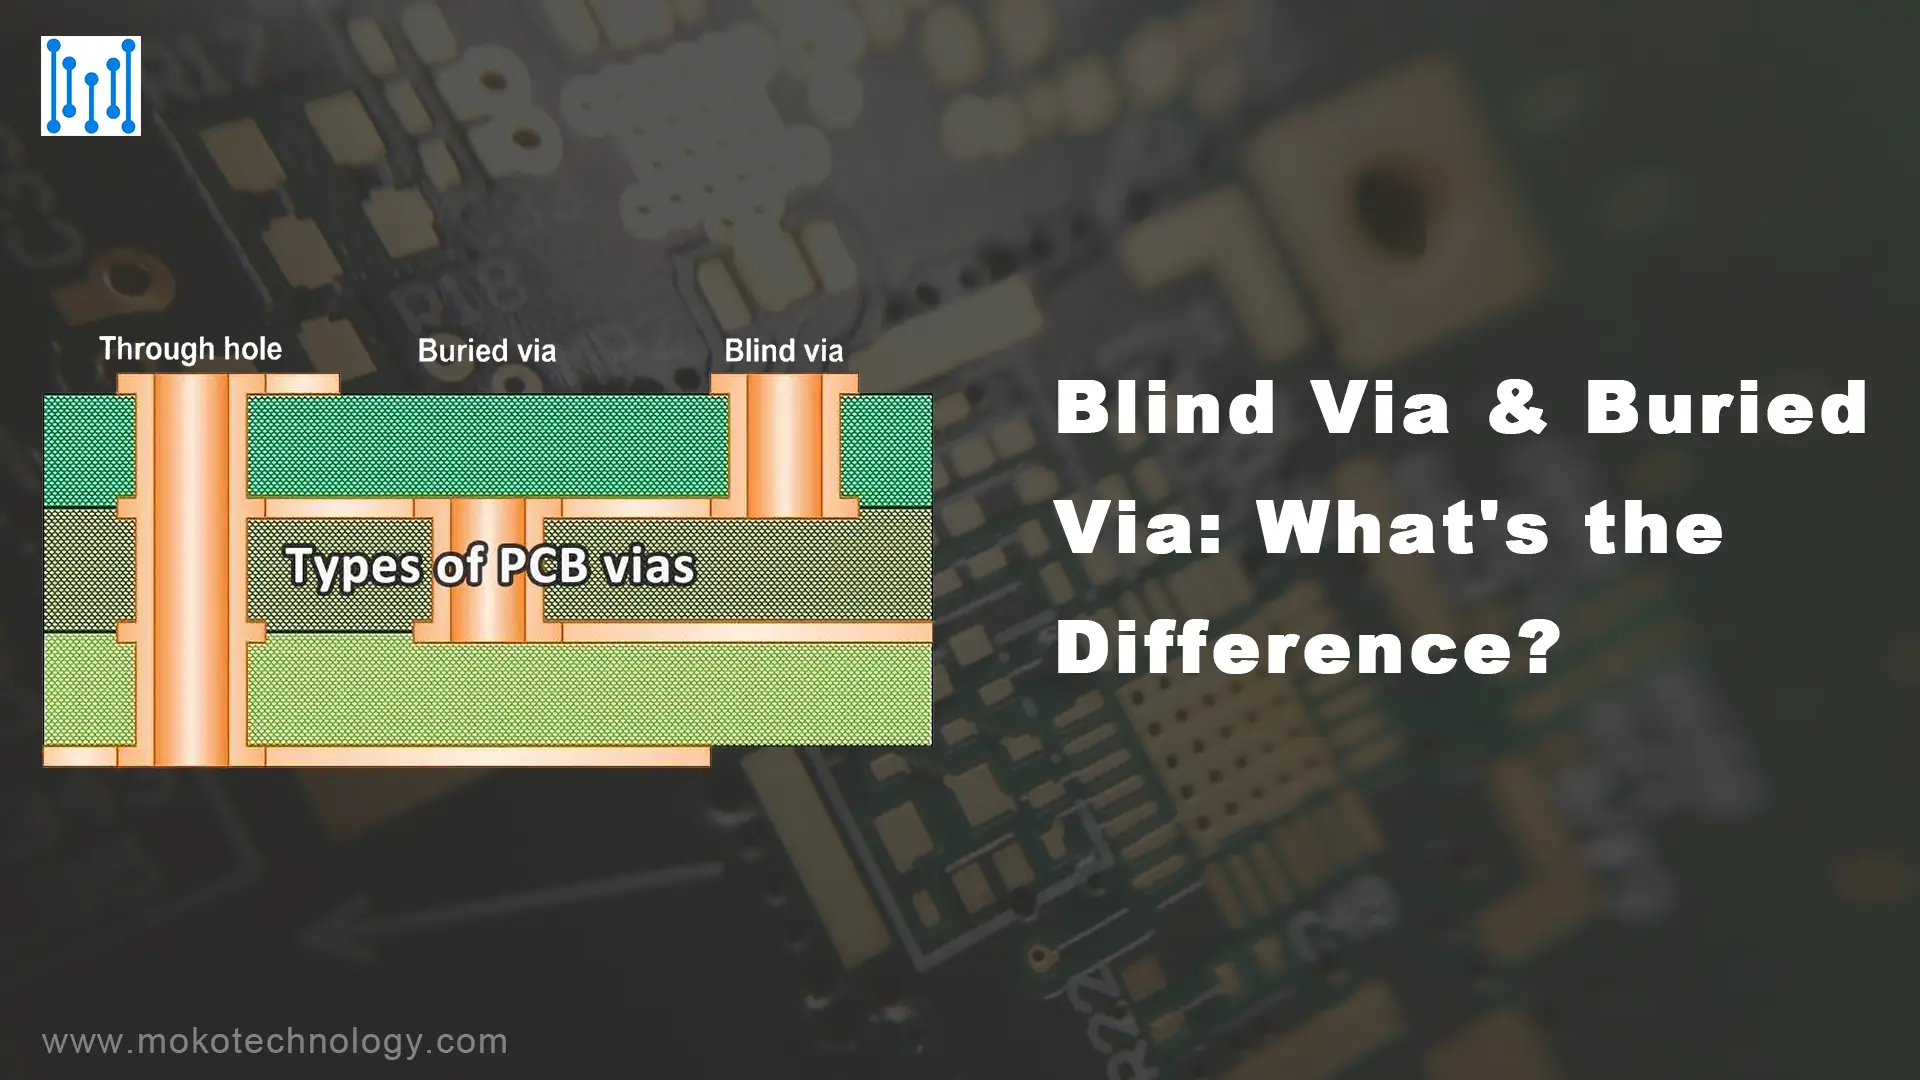 Blind Via & Buried Via: What’s the Difference?